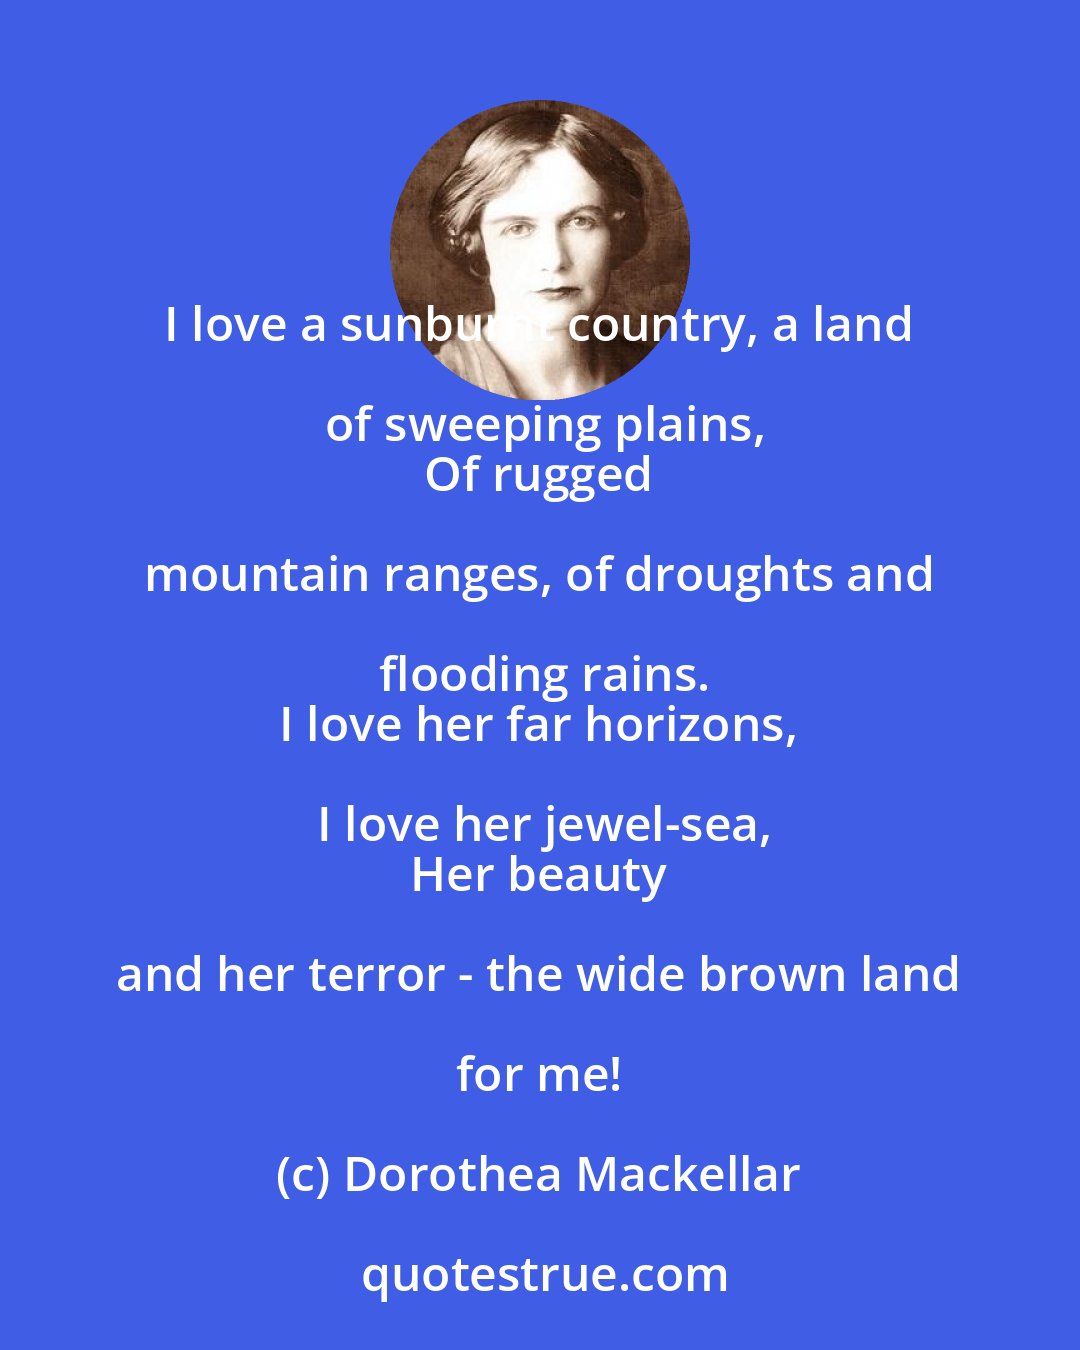 Dorothea Mackellar: I love a sunburnt country, a land of sweeping plains,
 Of rugged mountain ranges, of droughts and flooding rains.
 I love her far horizons, I love her jewel-sea,
 Her beauty and her terror - the wide brown land for me!